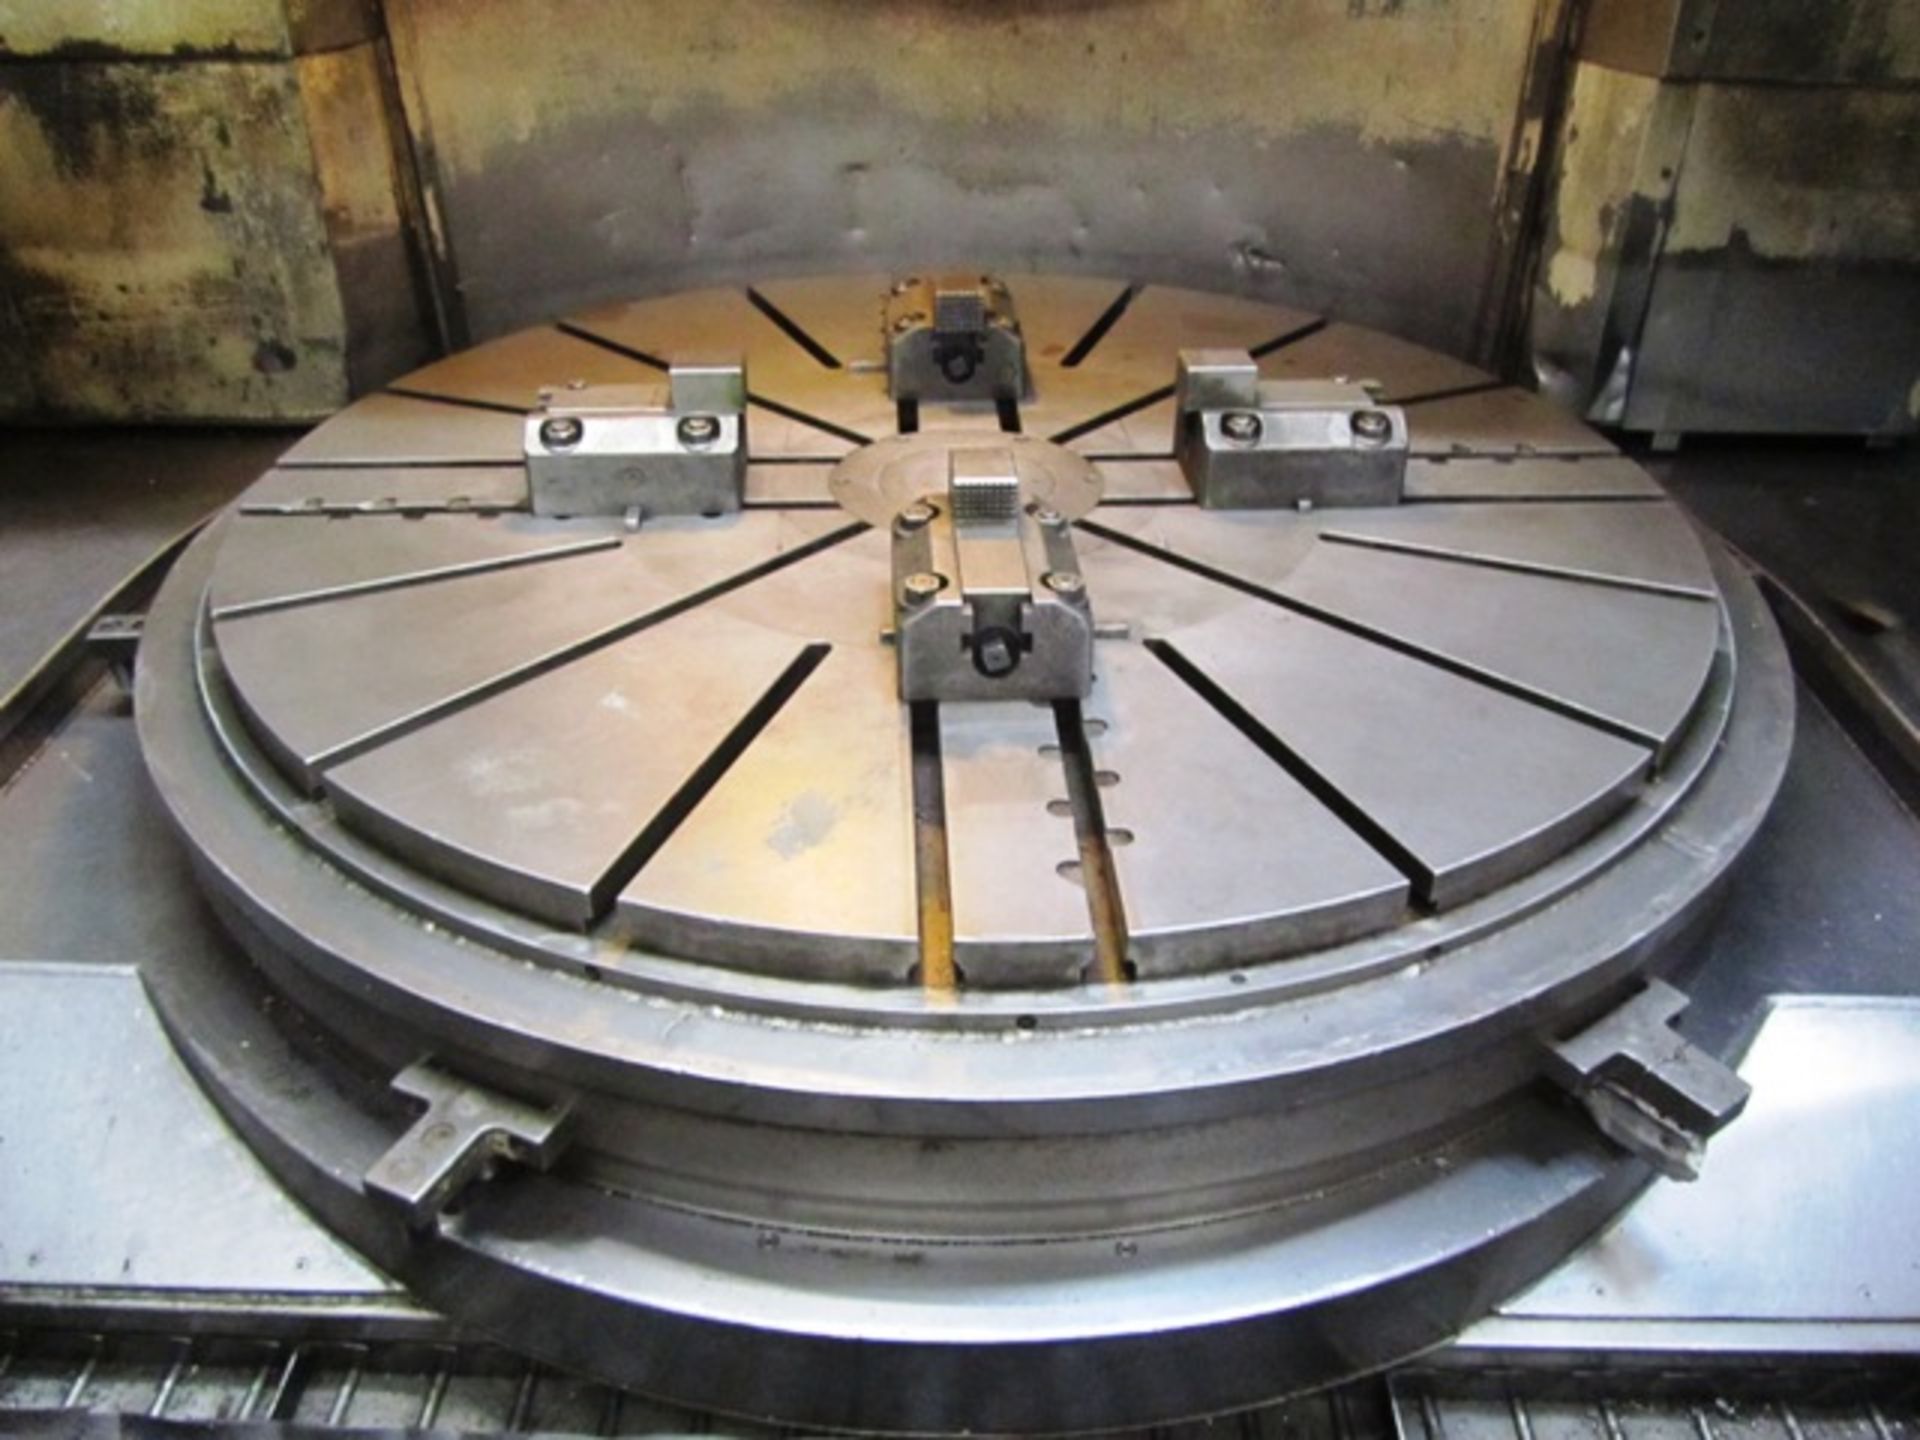 Toshiba TXN-16 CNC Vertical Boring Mill with 12-ATC, 62.99'' Table, 4-Jaw Chuck, 78.74'' Turning - Image 5 of 6